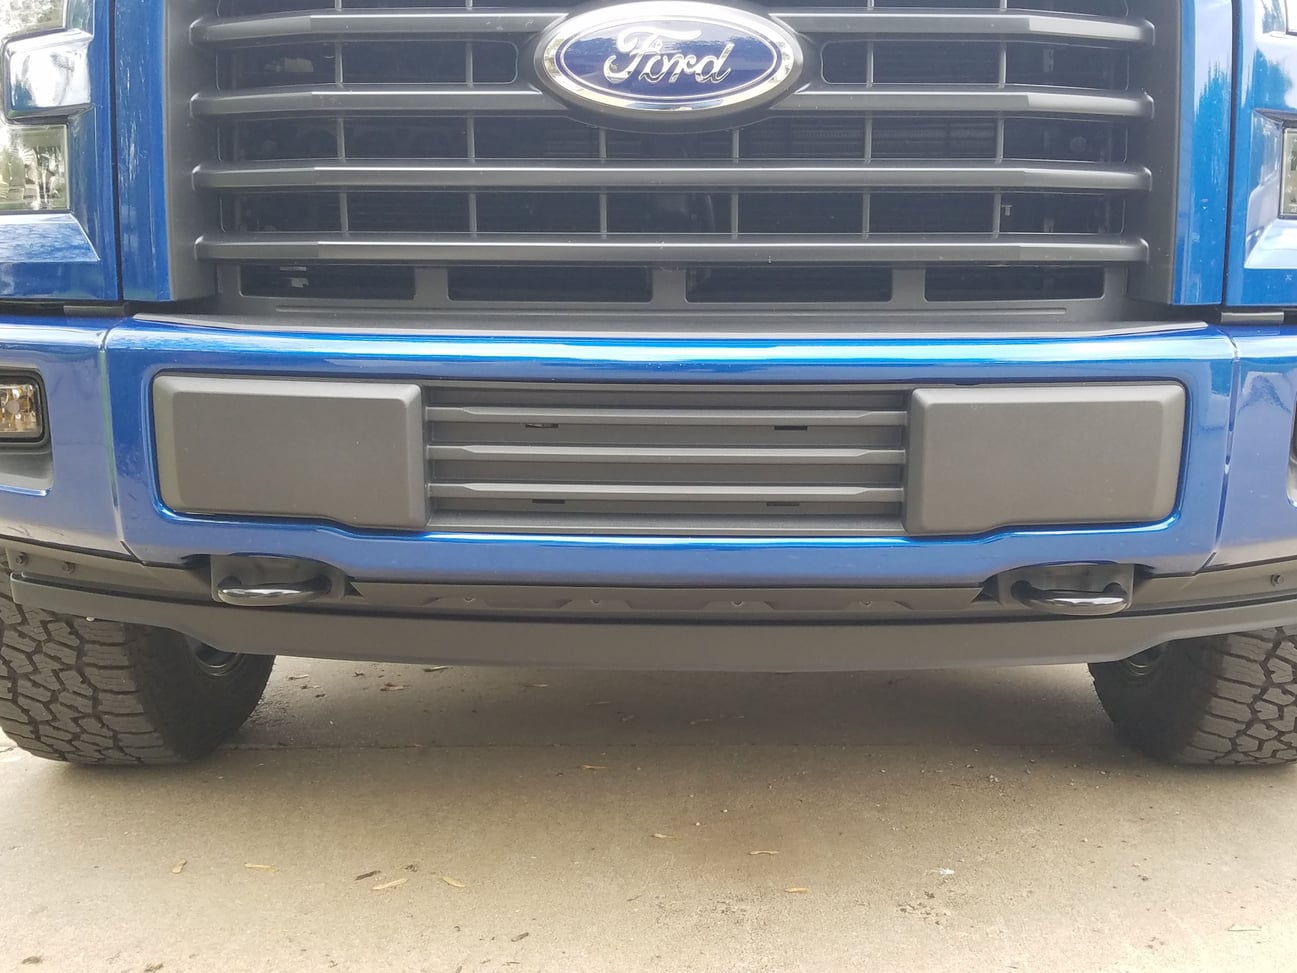 2019 Ford F150 tow hook removal easy 